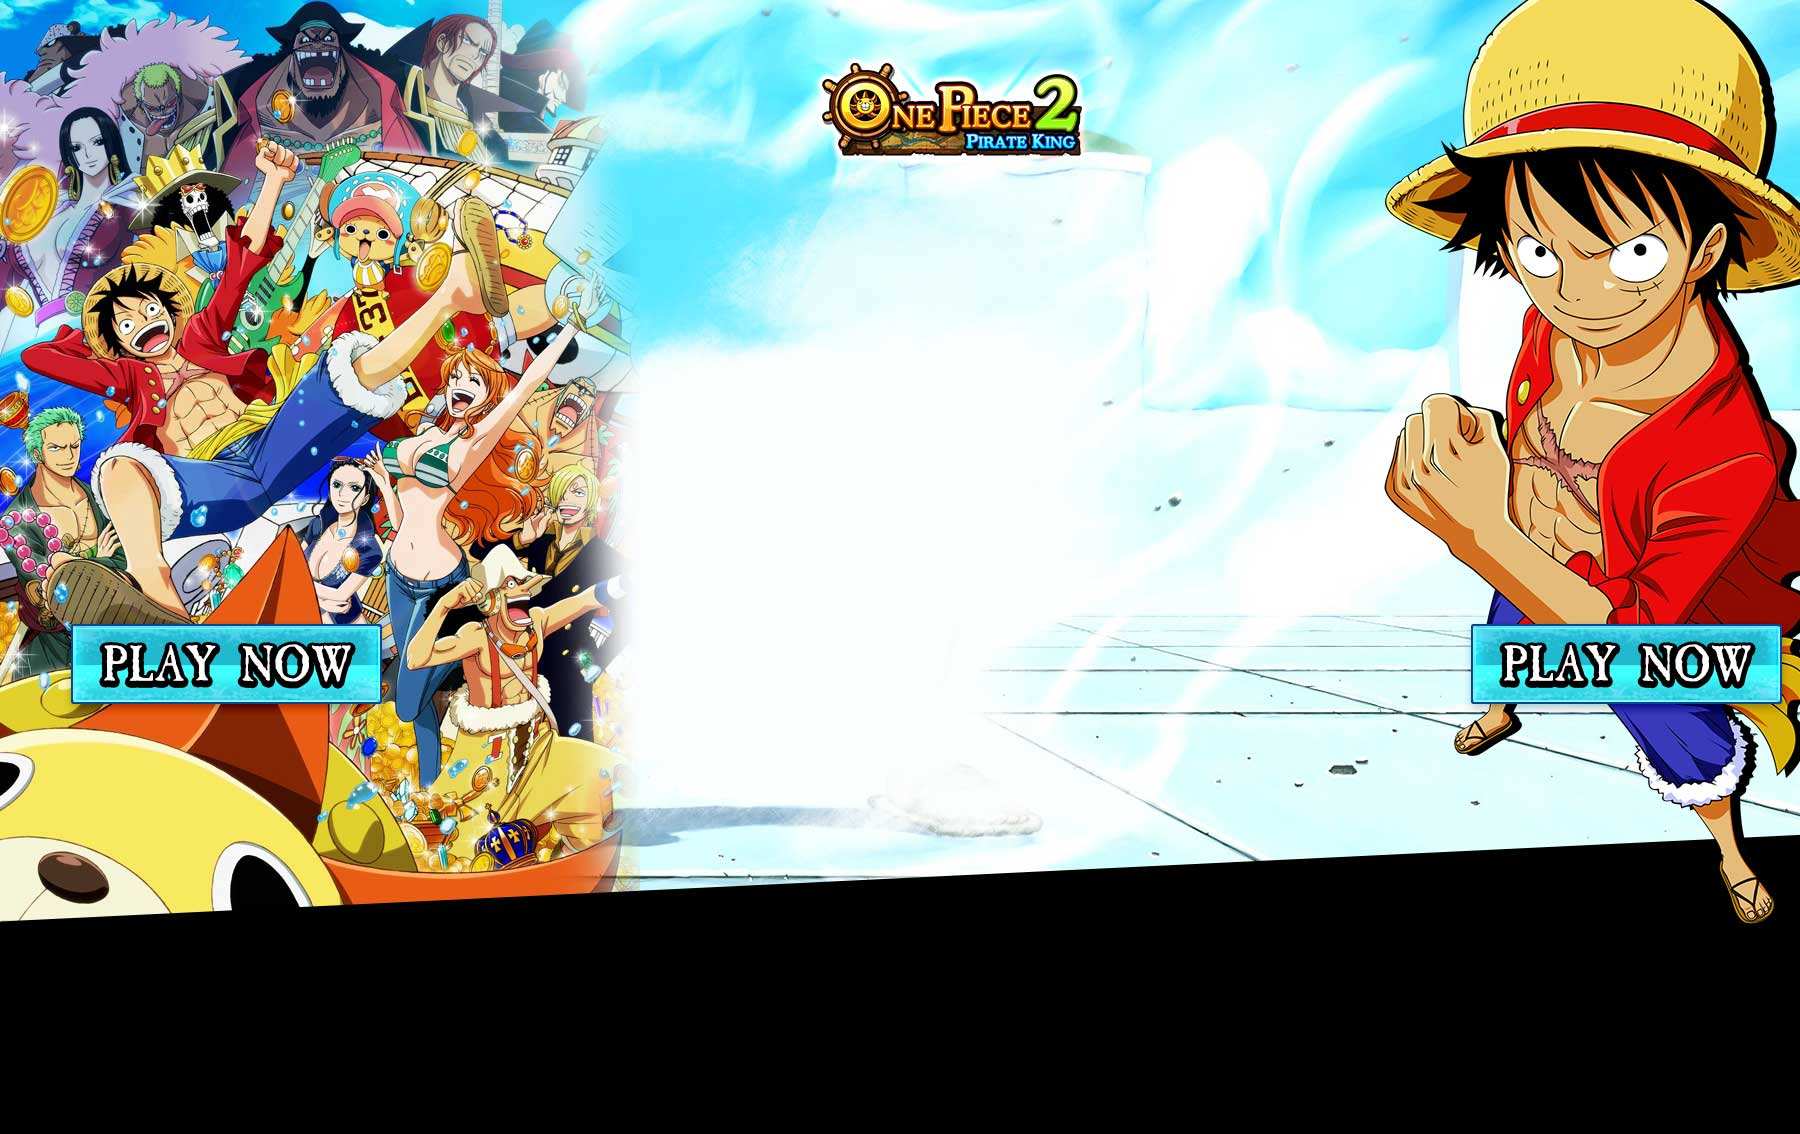 One Piece Online 2 Pirate King